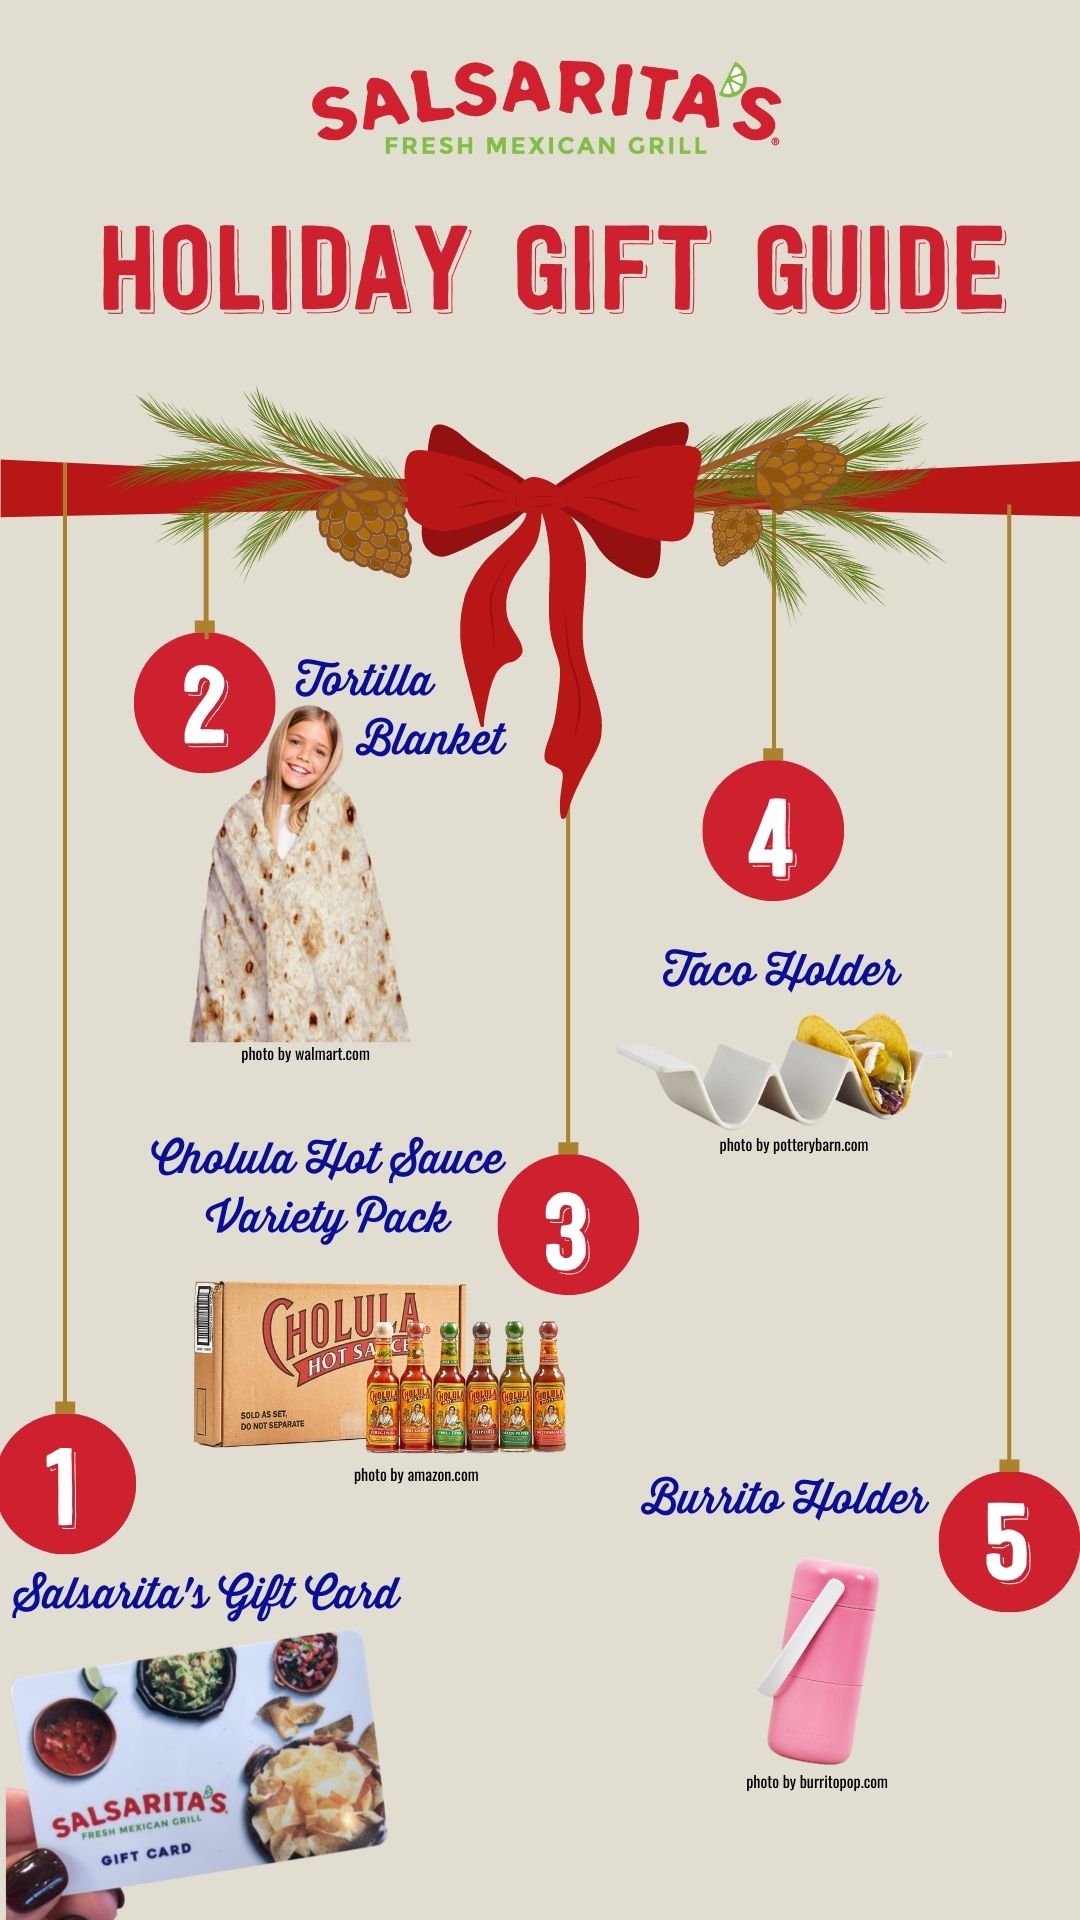 Salsarita's Holiday Gift Guide